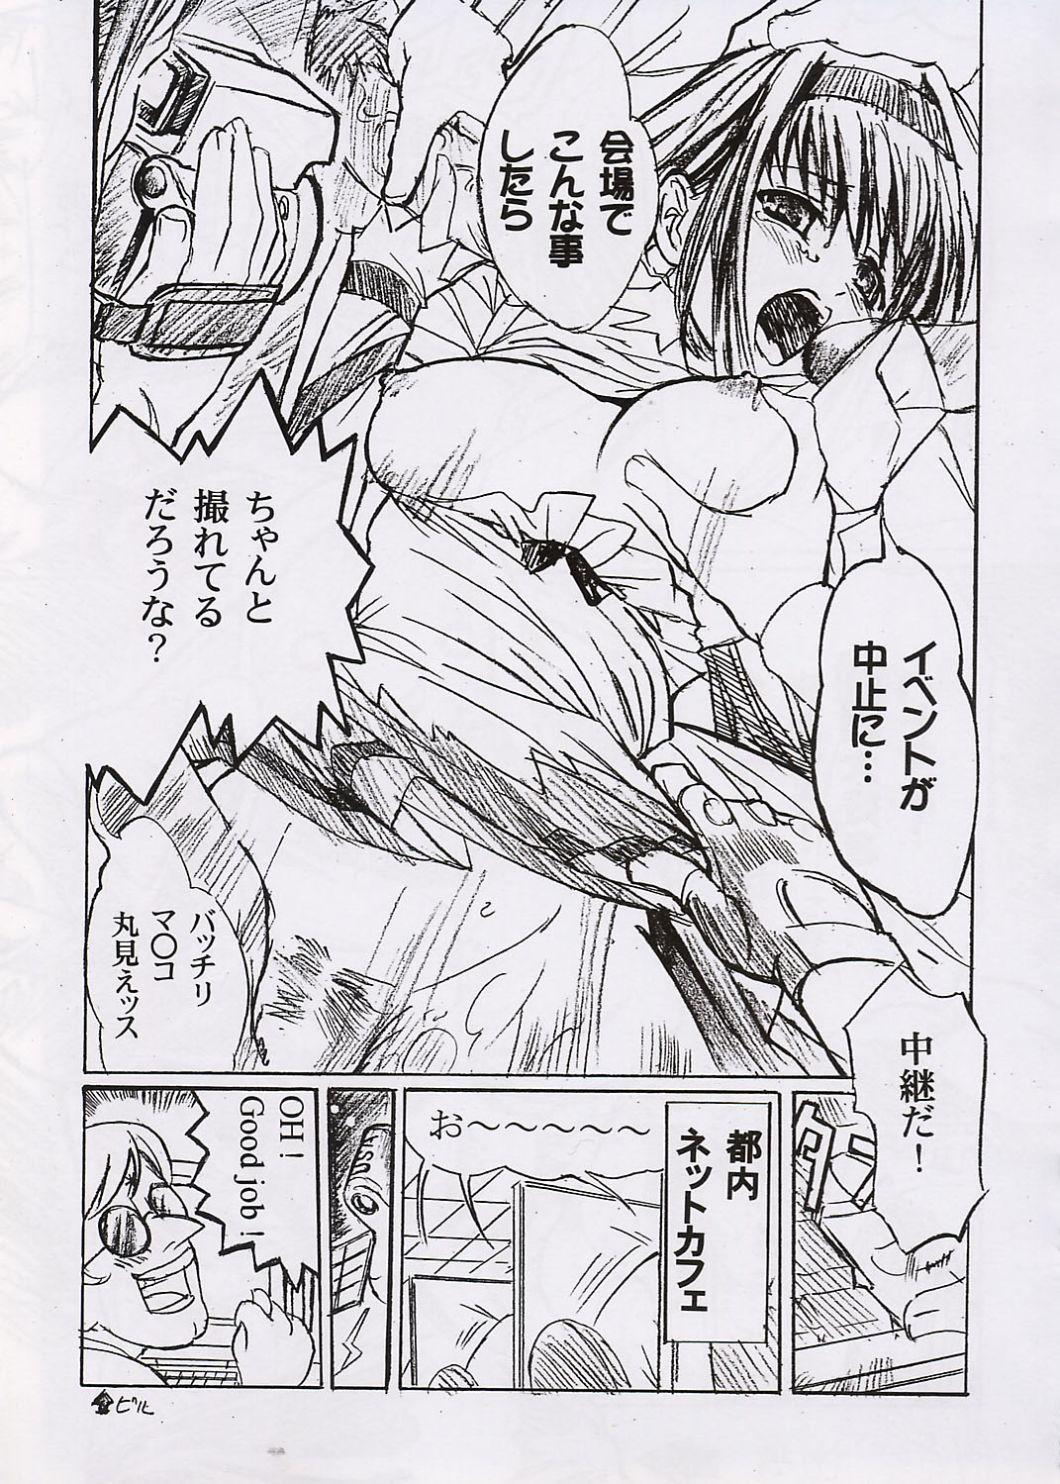 From HATOBON Pendeja - Page 6